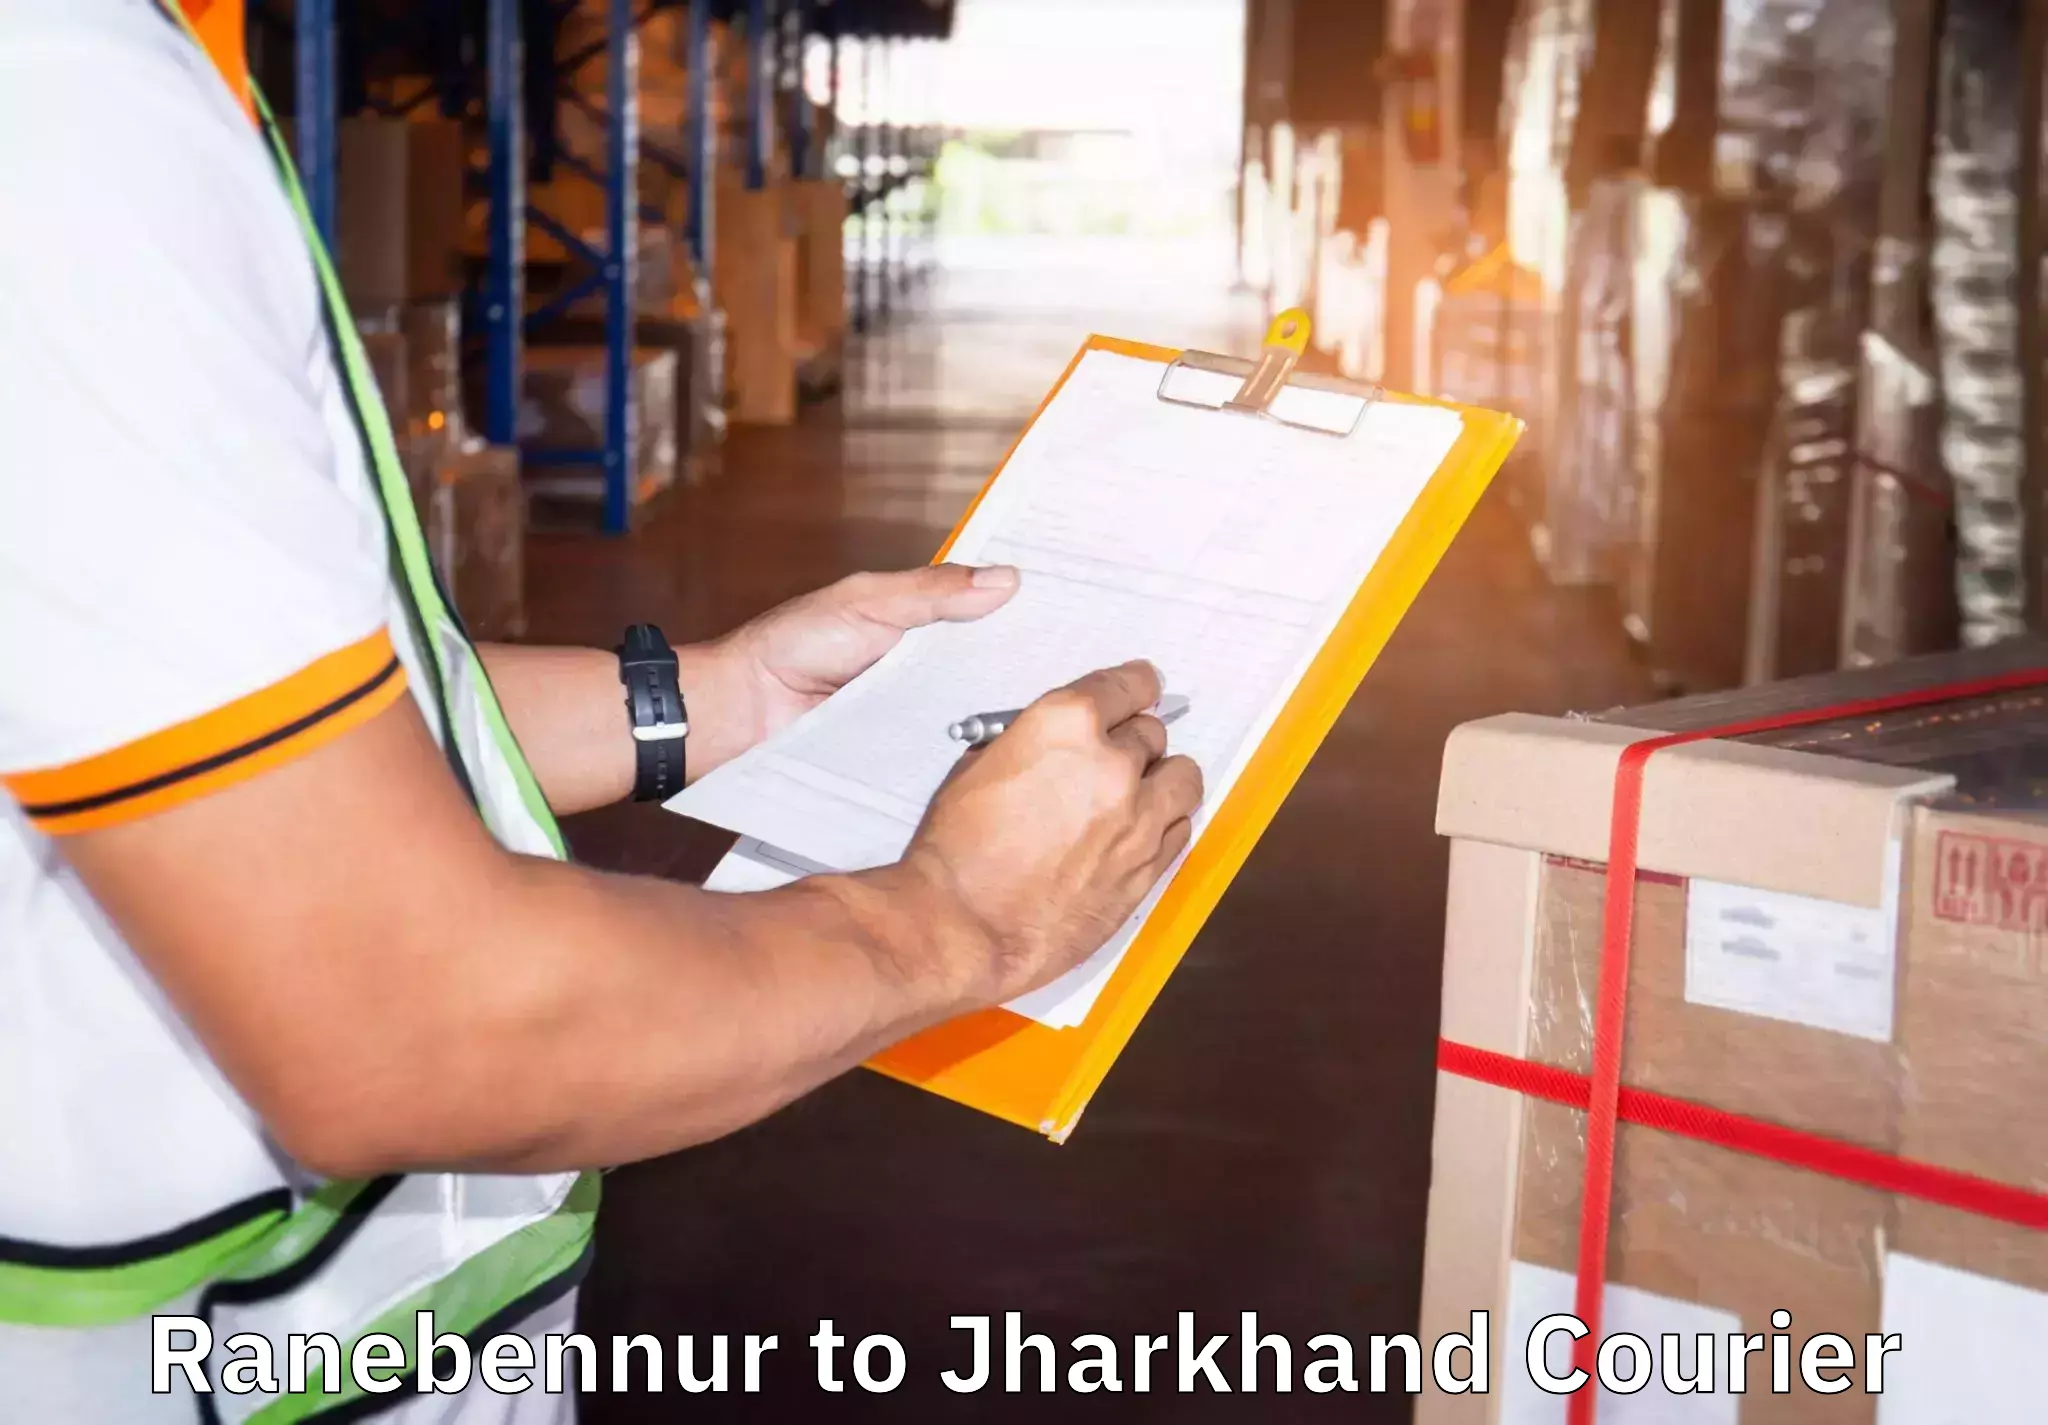 Budget-friendly movers in Ranebennur to Jharkhand